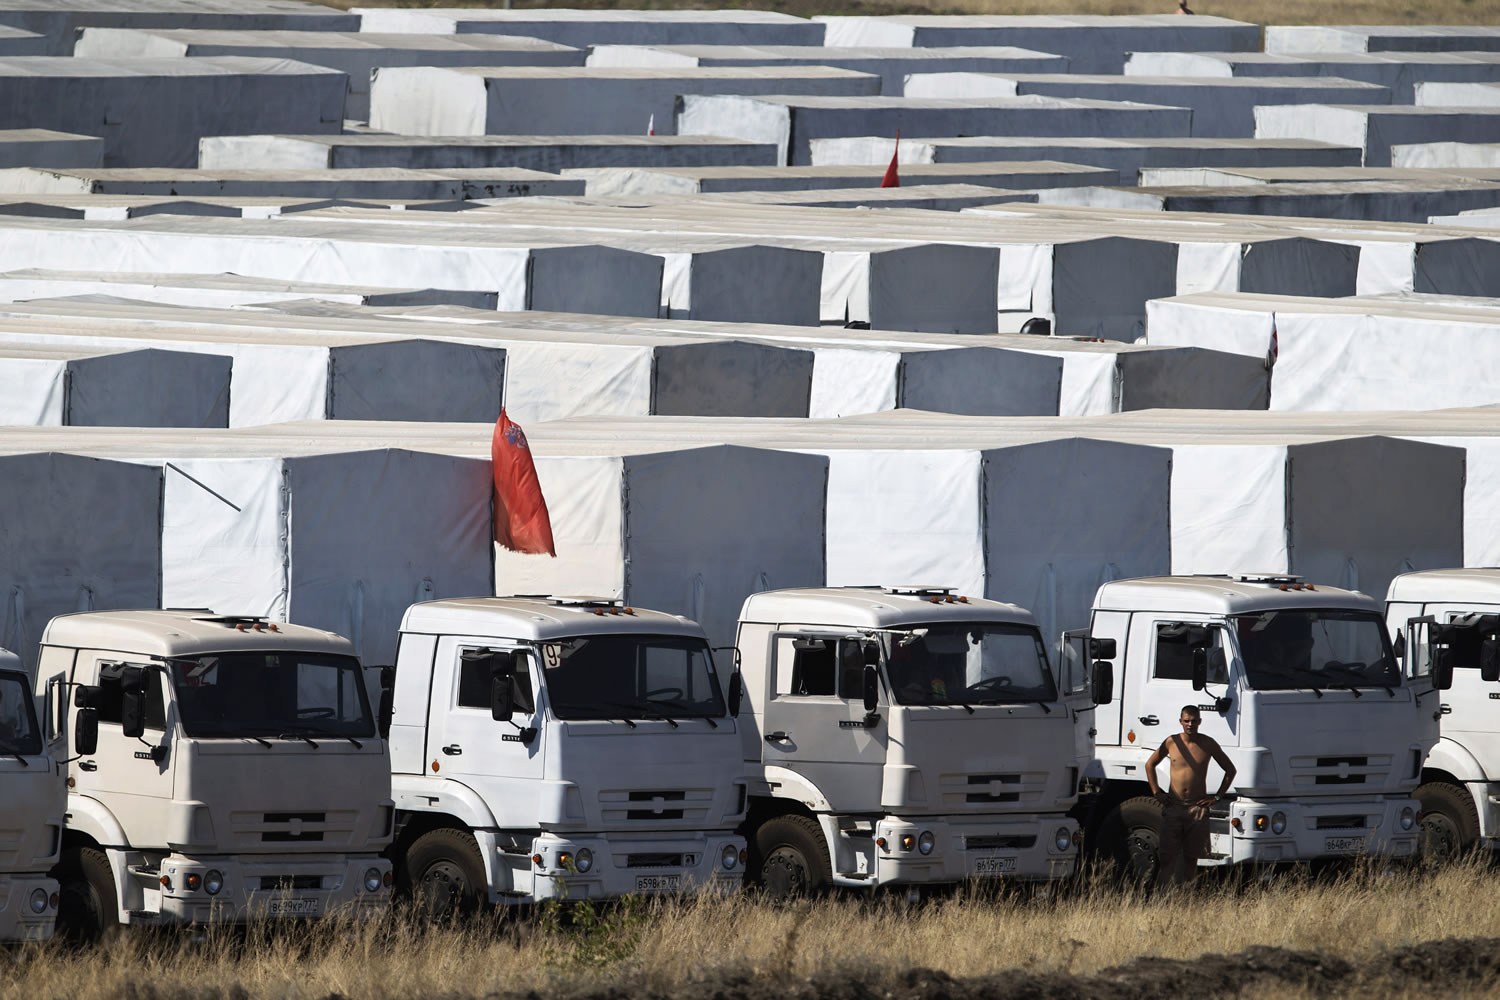 A driver stands near trucks forming part of an aid convoy parked in a field Saturday about 17 miles from the Ukrainian border, near Kamensk-Shakhtinsky, Rostov-on-Don region, Russia.